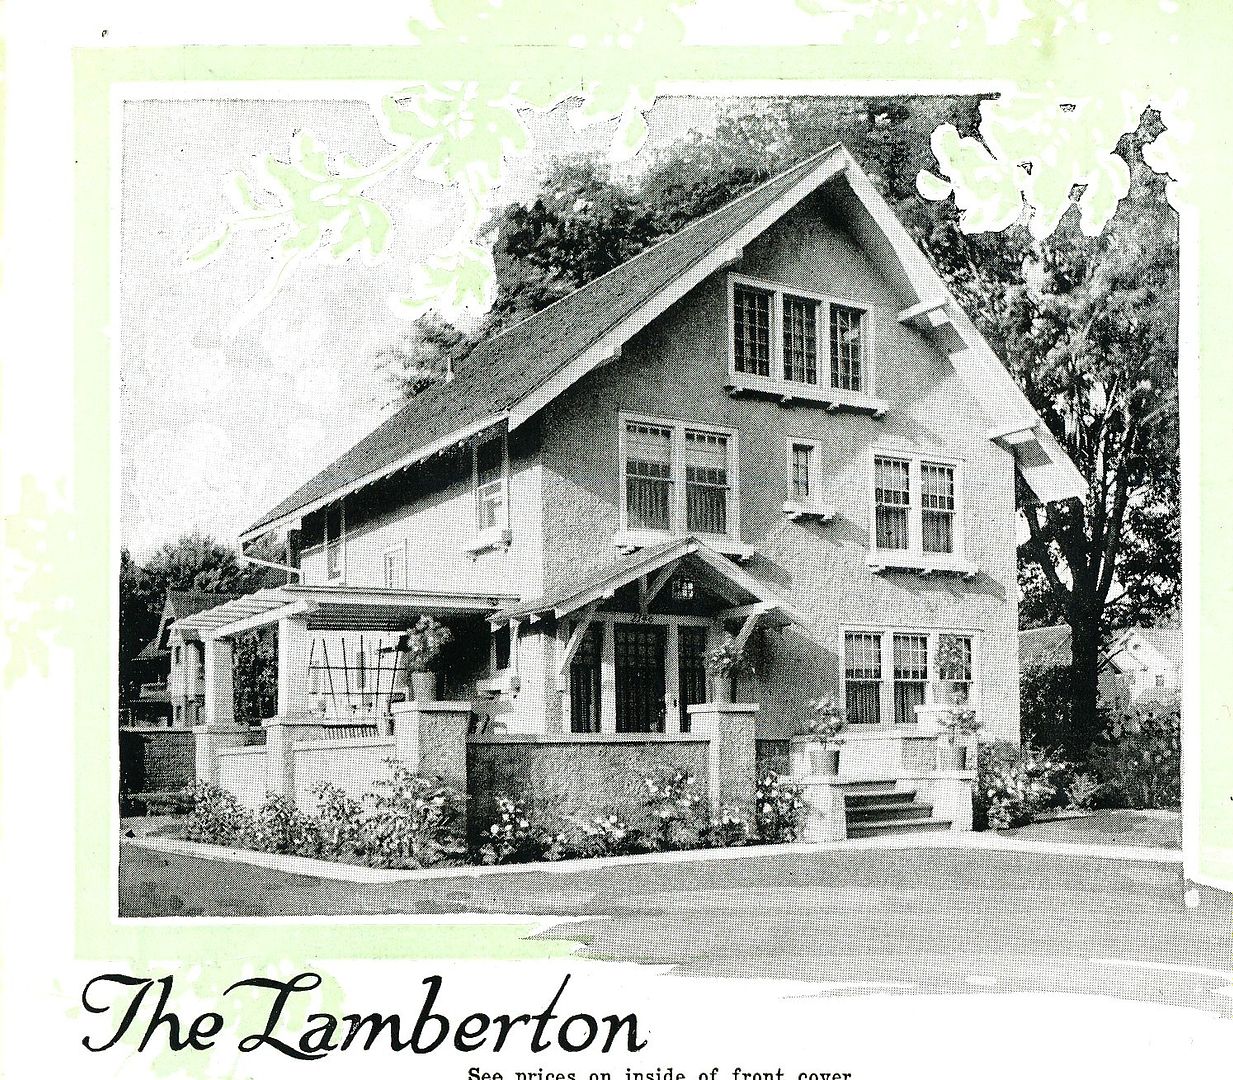 This Aladdin Lamberton is in Westhaven, not far from the Sears Westly (shown above). Aladdin was yet another mail-order company that sold entire kit homes through catalogs. Aladdin had a massive mill in Wilmington, NC which might explain why we have so many Aladdins here in Hampton Roads. 